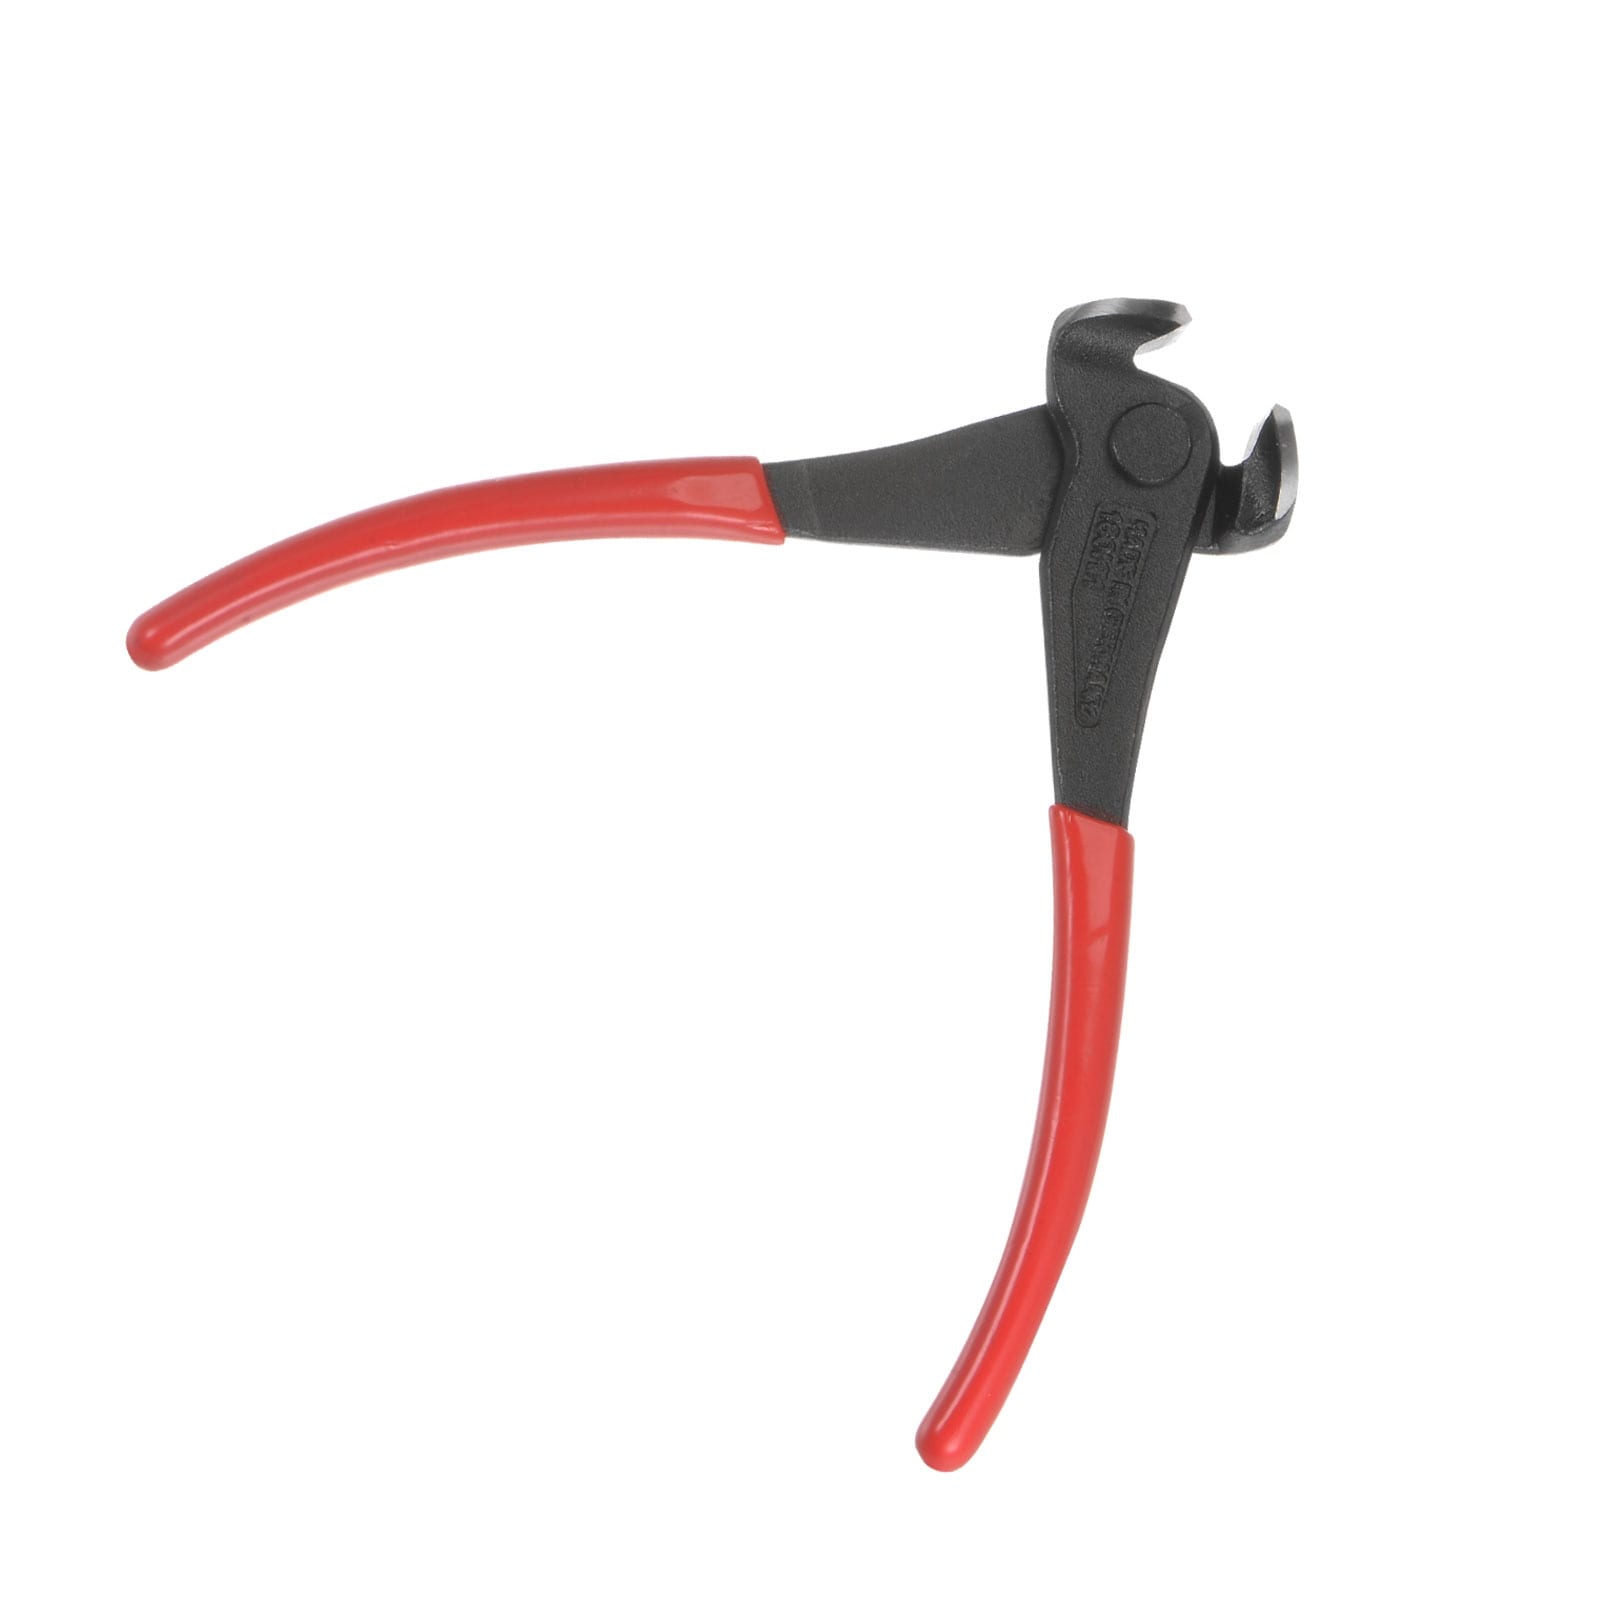 End Cutting Pliers 7 Nail Nippers Puller Plier with Red PVC Handle - Black  Red - 7 Inch - Bed Bath & Beyond - 37848060